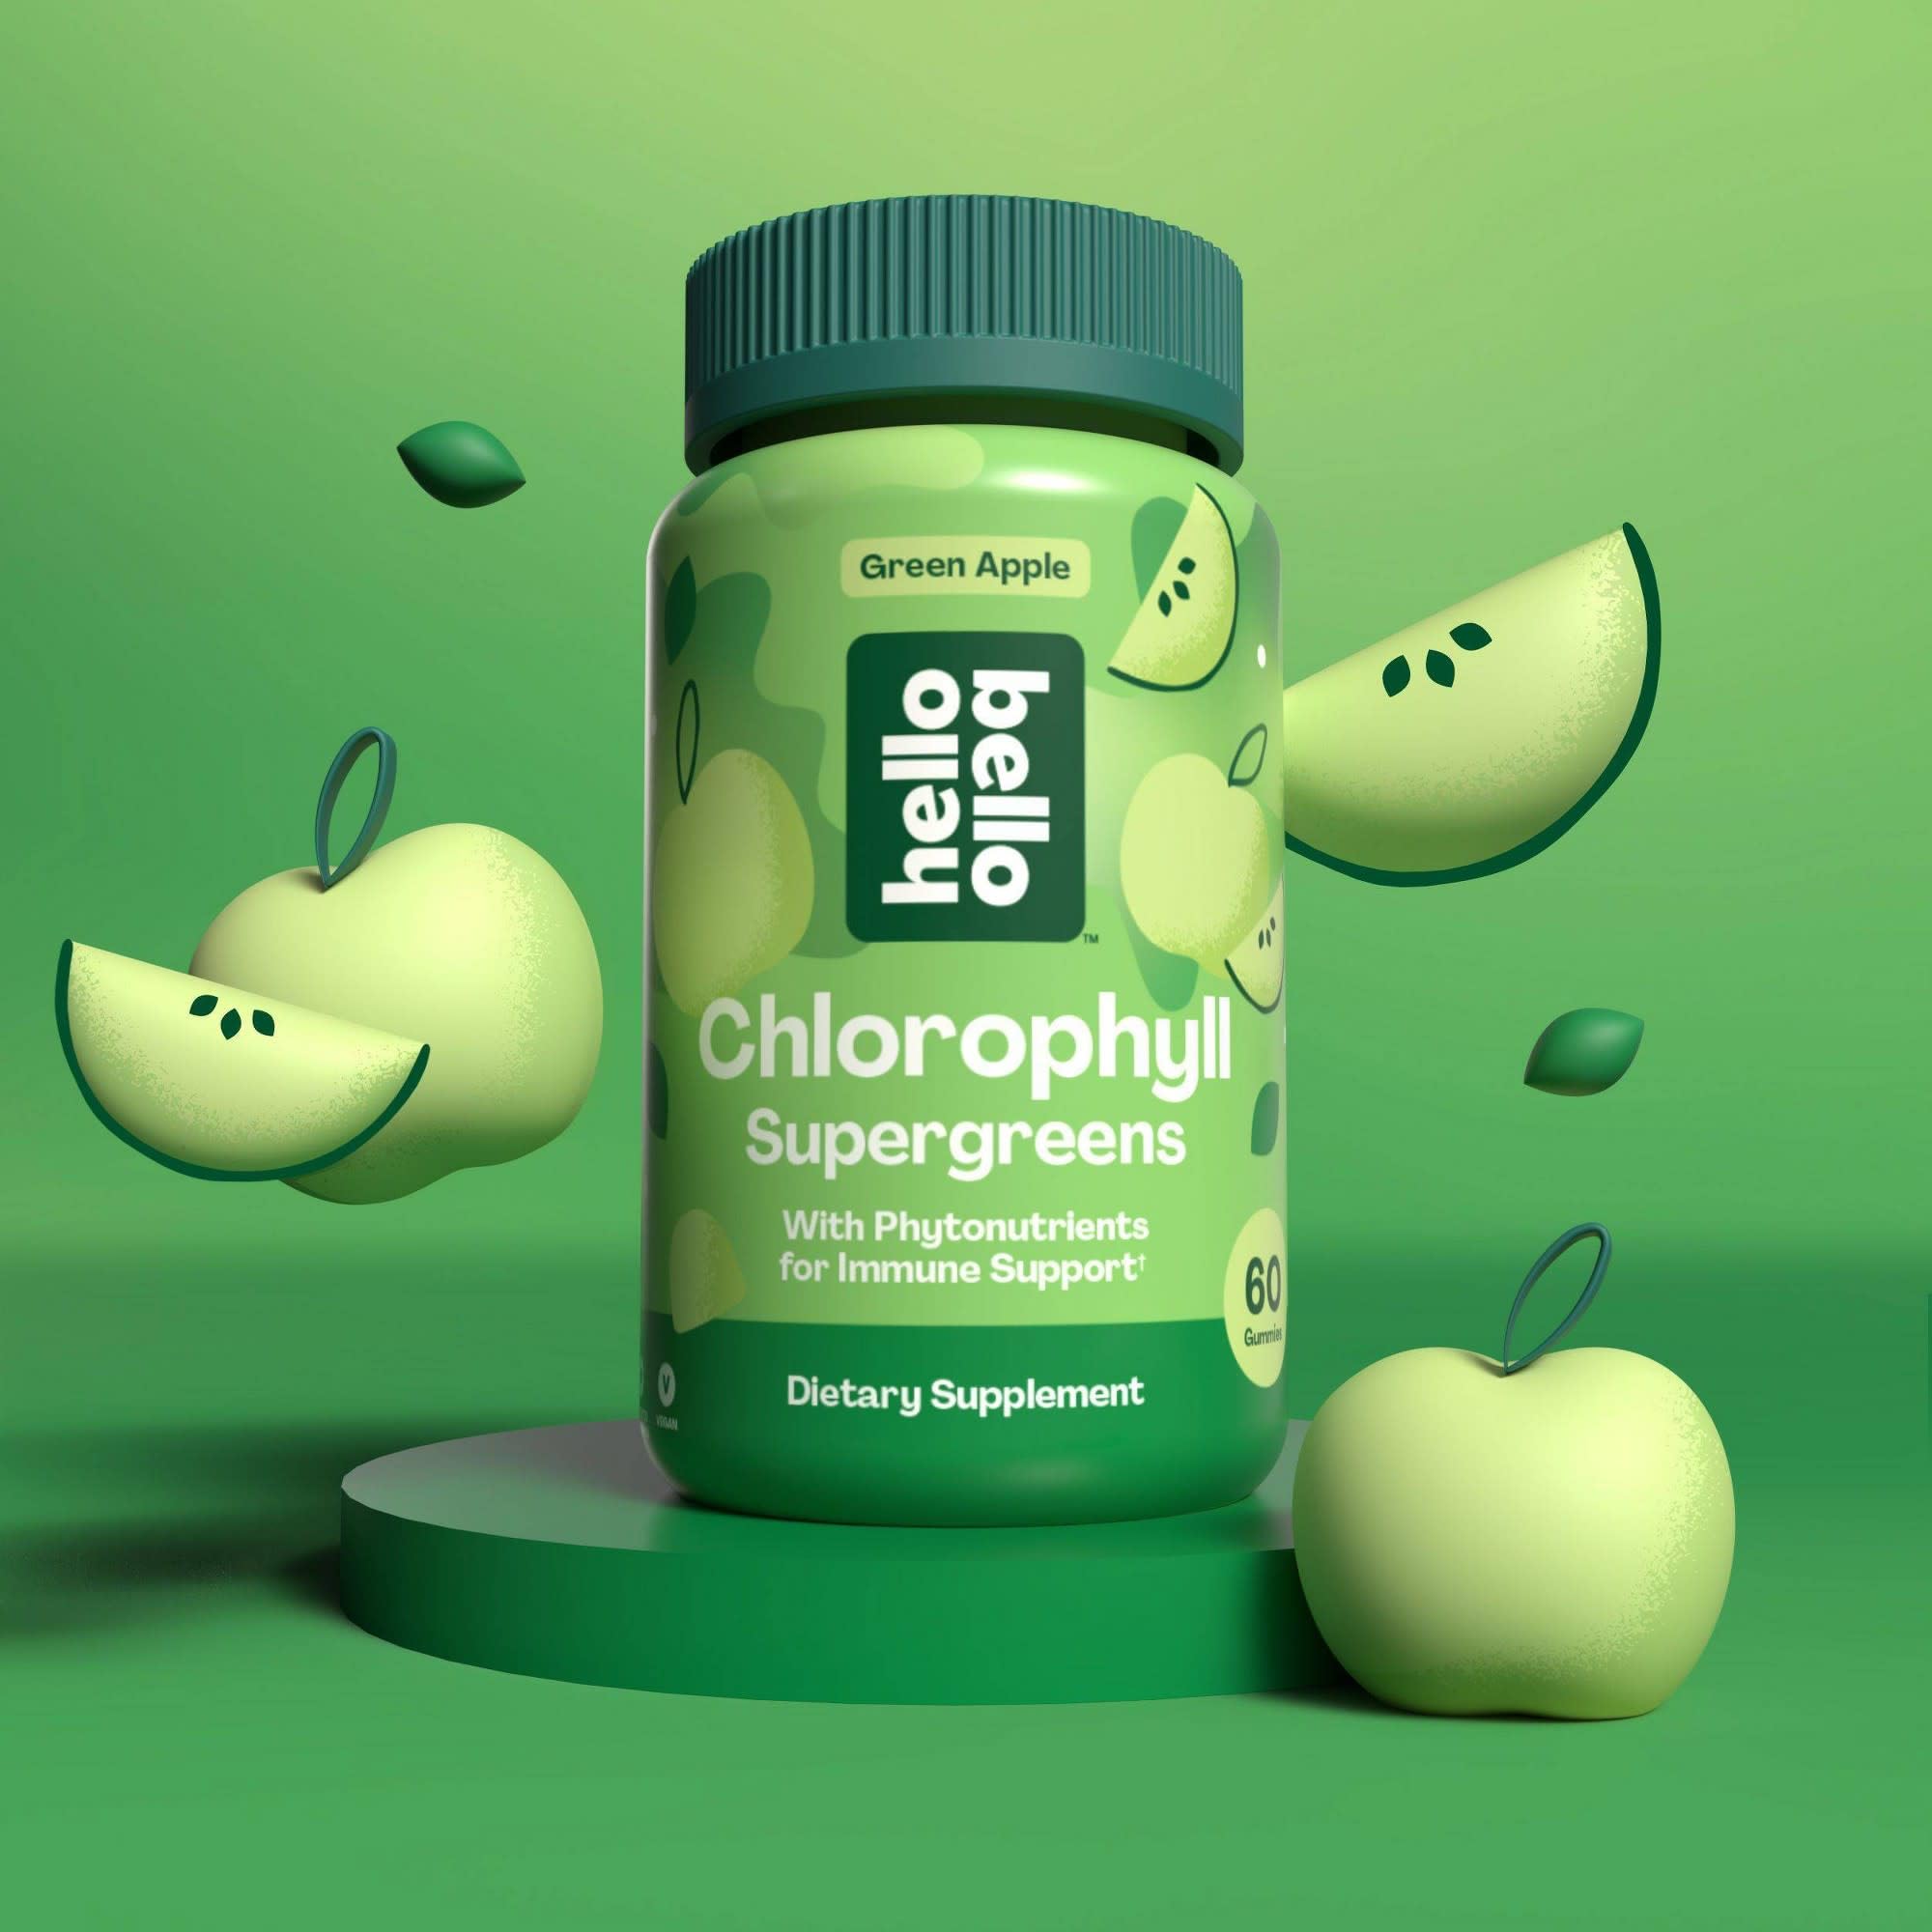 Hello Bello Chlorophyll Supergreens Gummy Vitamins - Vegan Super Greens Blend with Phytonutrients and Plant Sterols - Green Apple Flavor - 30 Servings (60 Count Bottle) (Pack of 2)